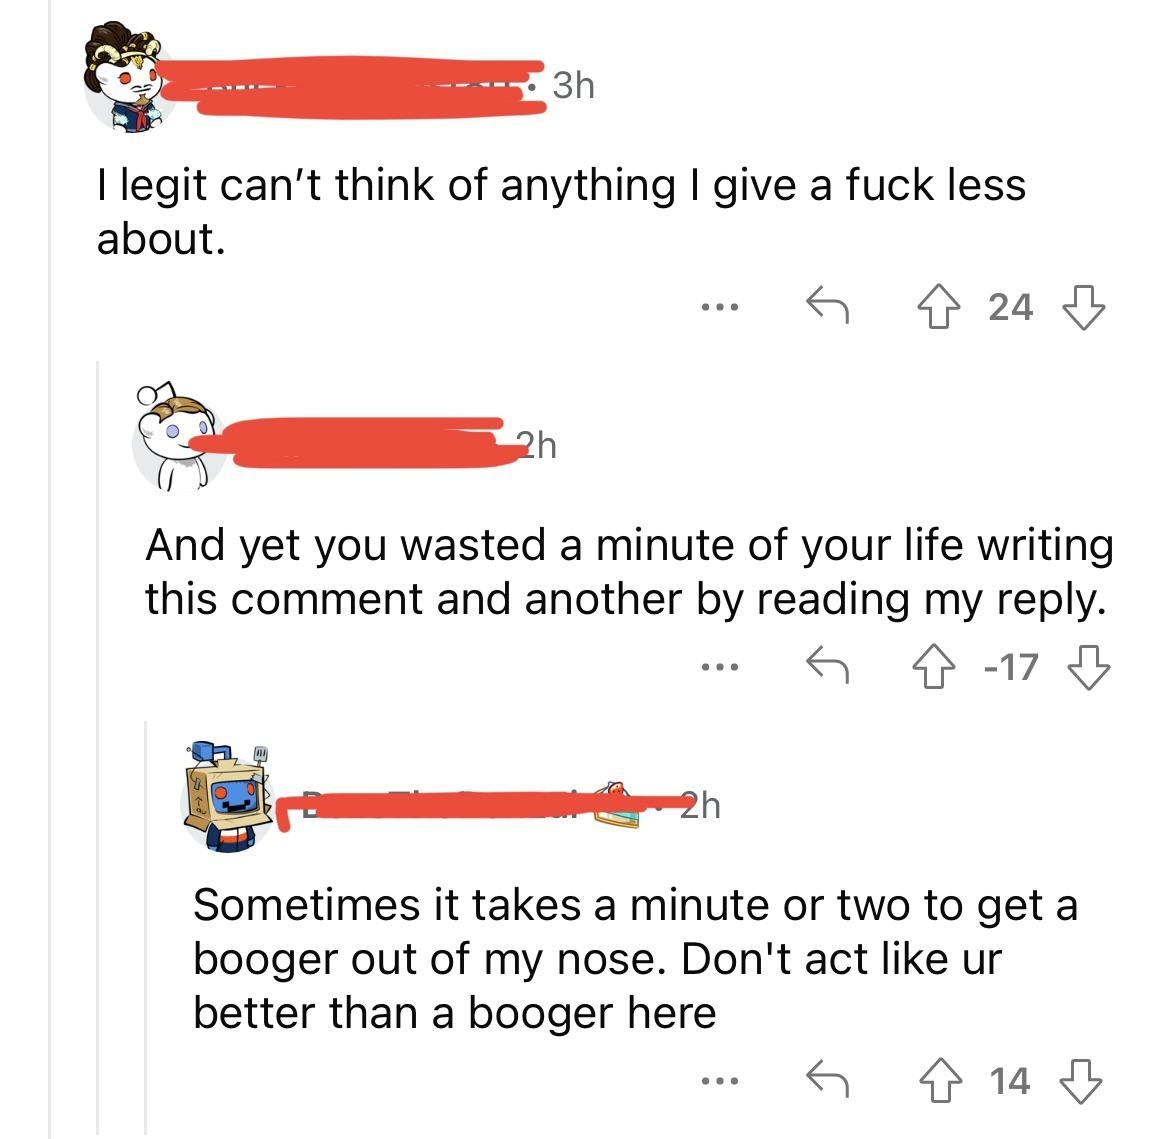 &quot;I can&#x27;t think of anything I give a fuck less about,&quot; &quot;And yet you wasted a minute writing this comment and another reading my reply&quot;; response: &quot;Sometimes it takes a minute or two to get a booger out of my nose, don&#x27;t act like ur better than a booger&quot;